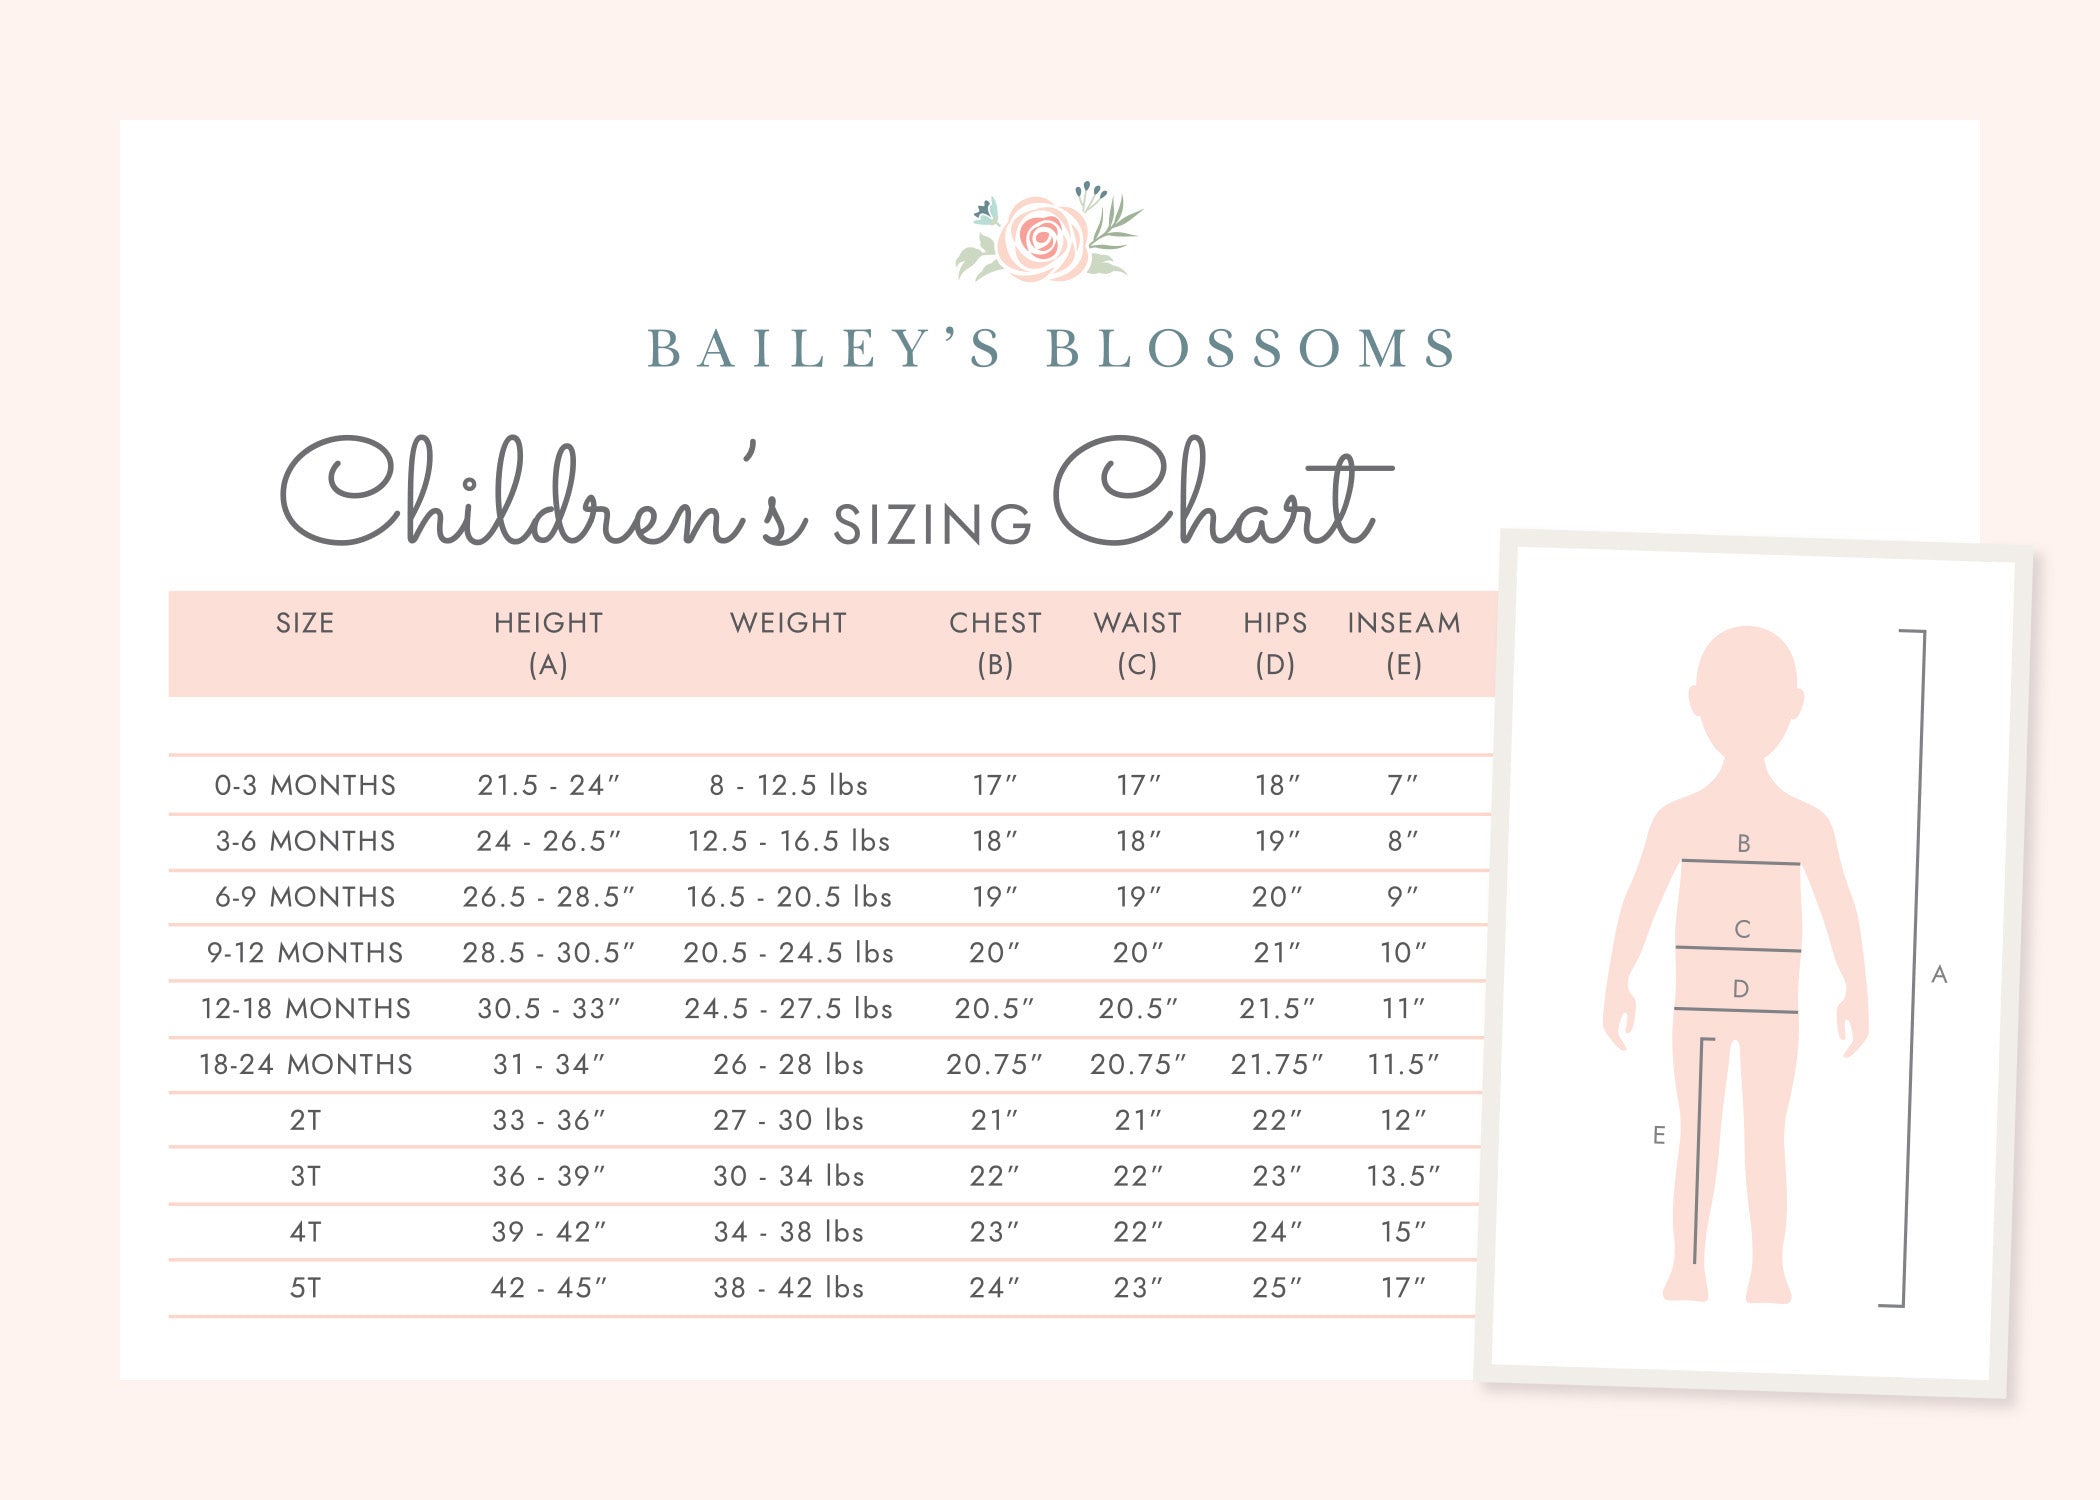 Bailey's Blossoms Sizing Chart